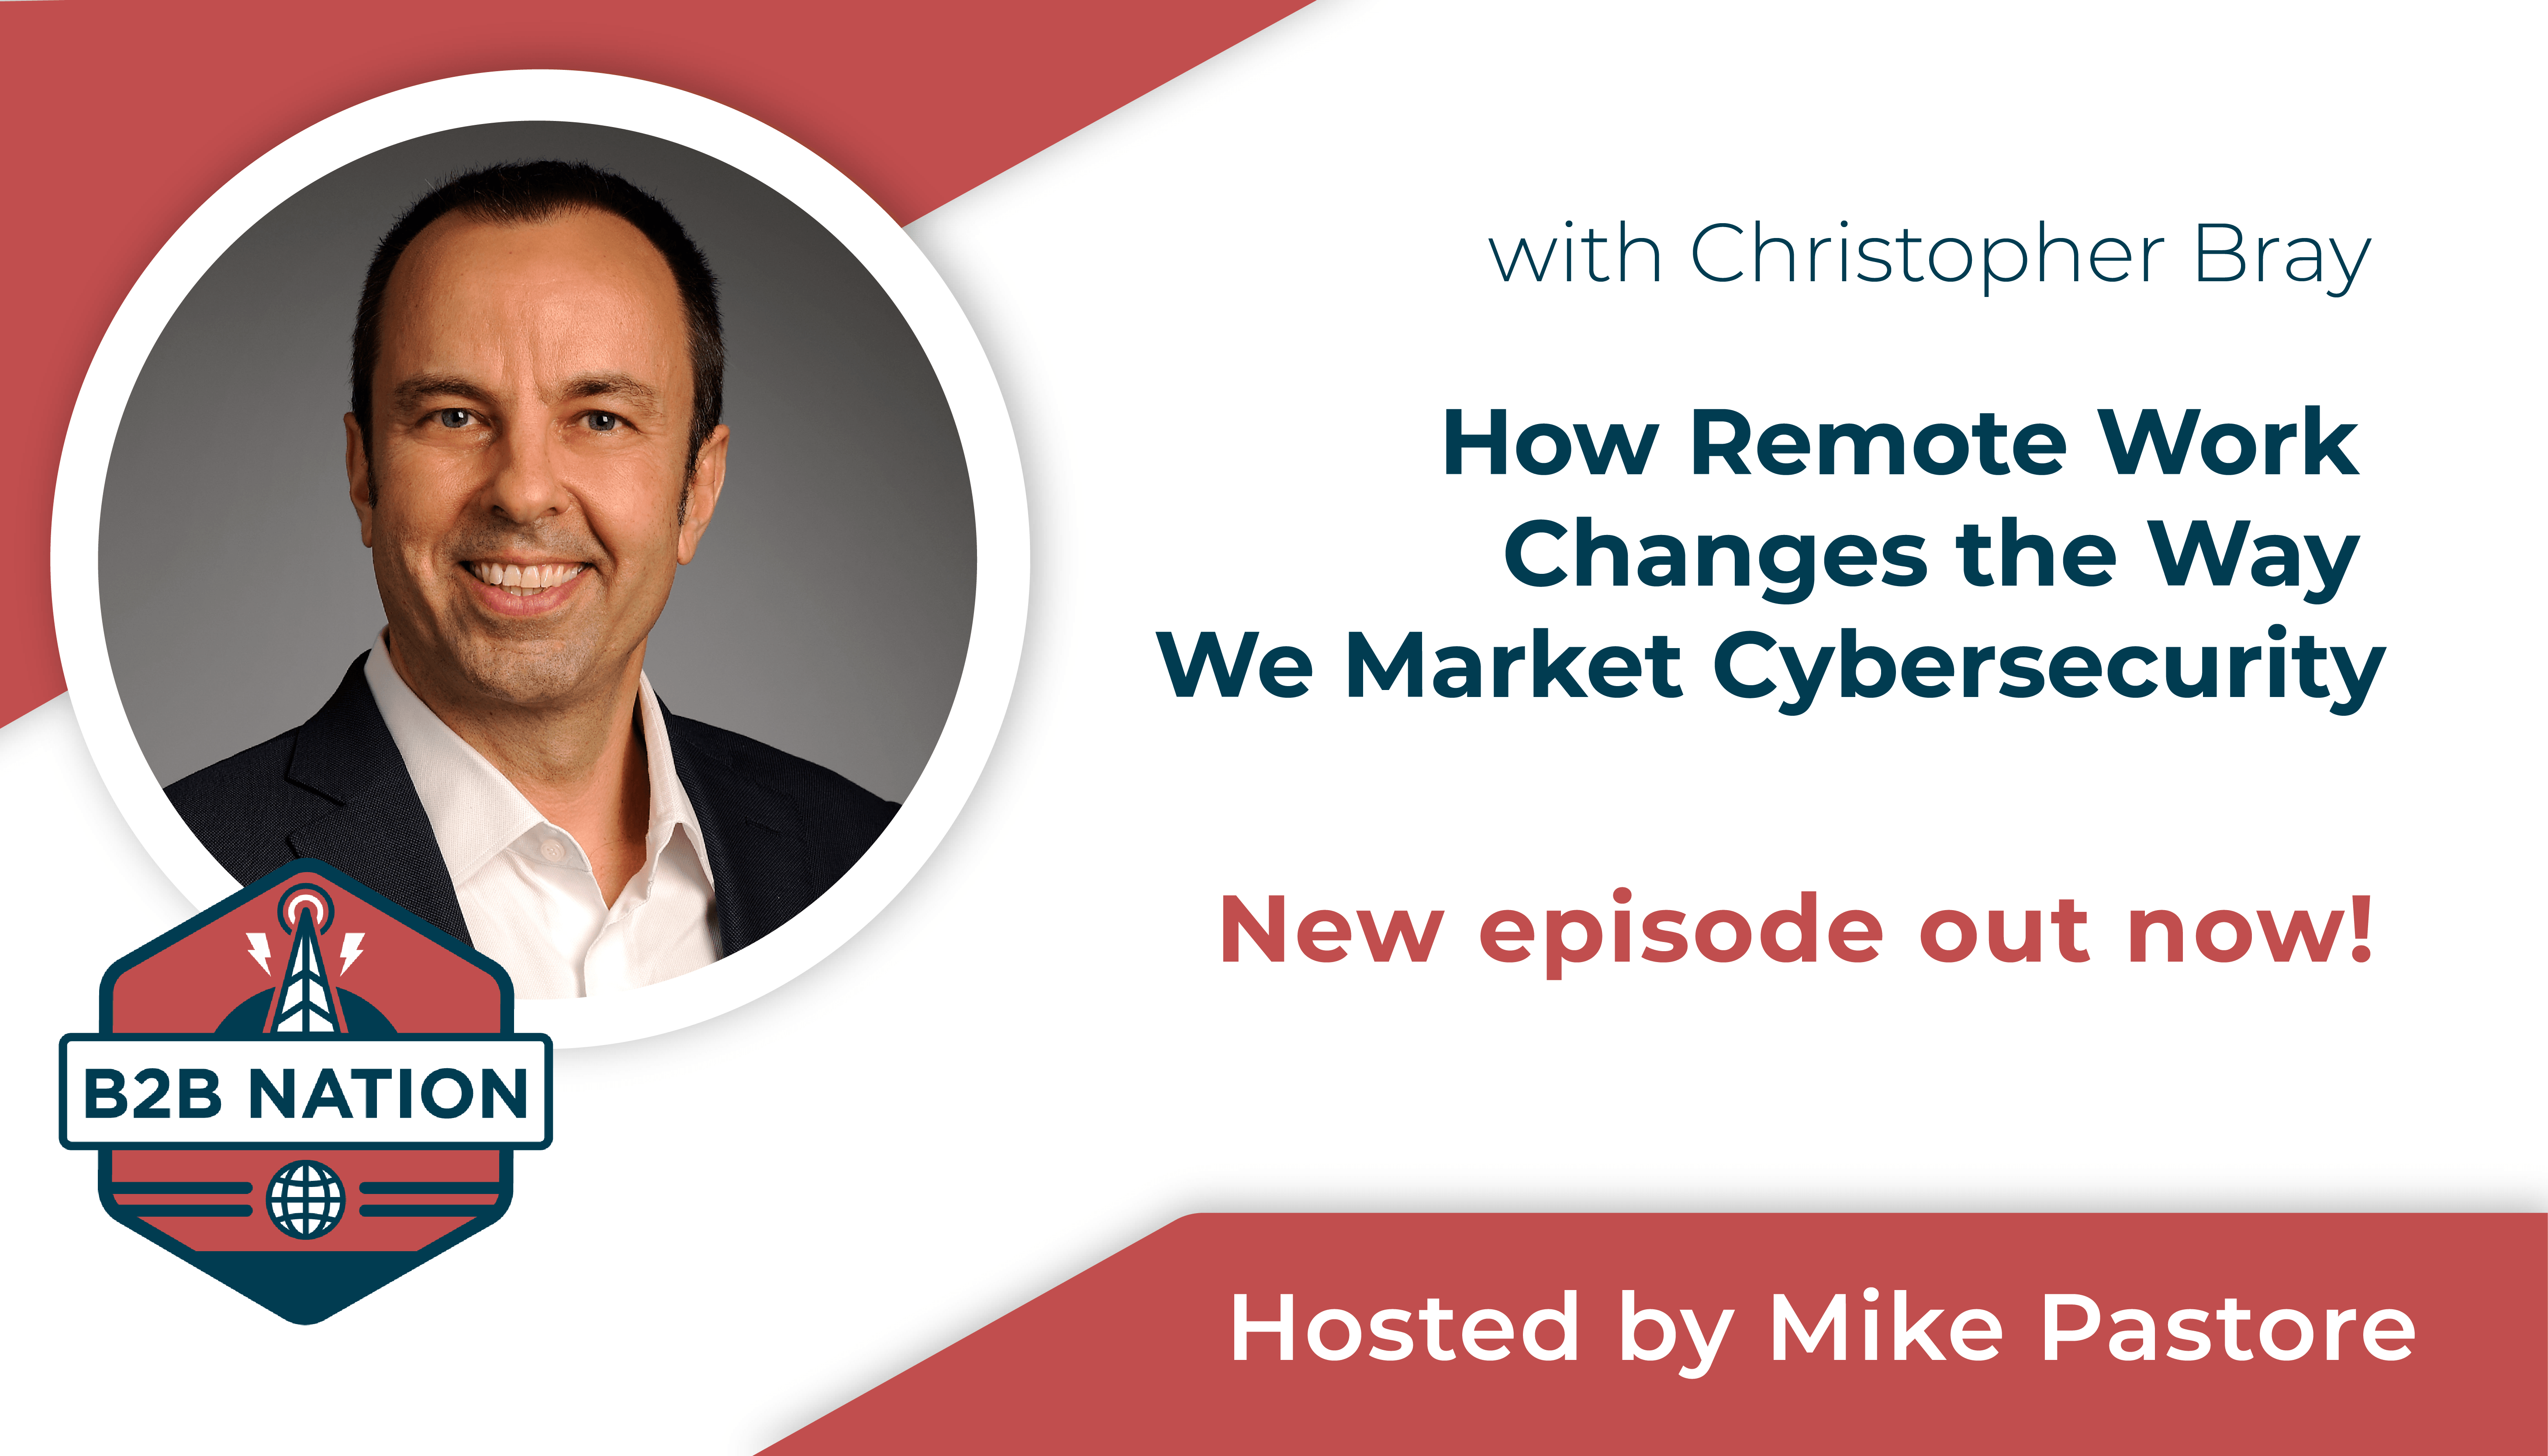 Christopher Bray discusses cybersecurity marketing on B2B Nation.